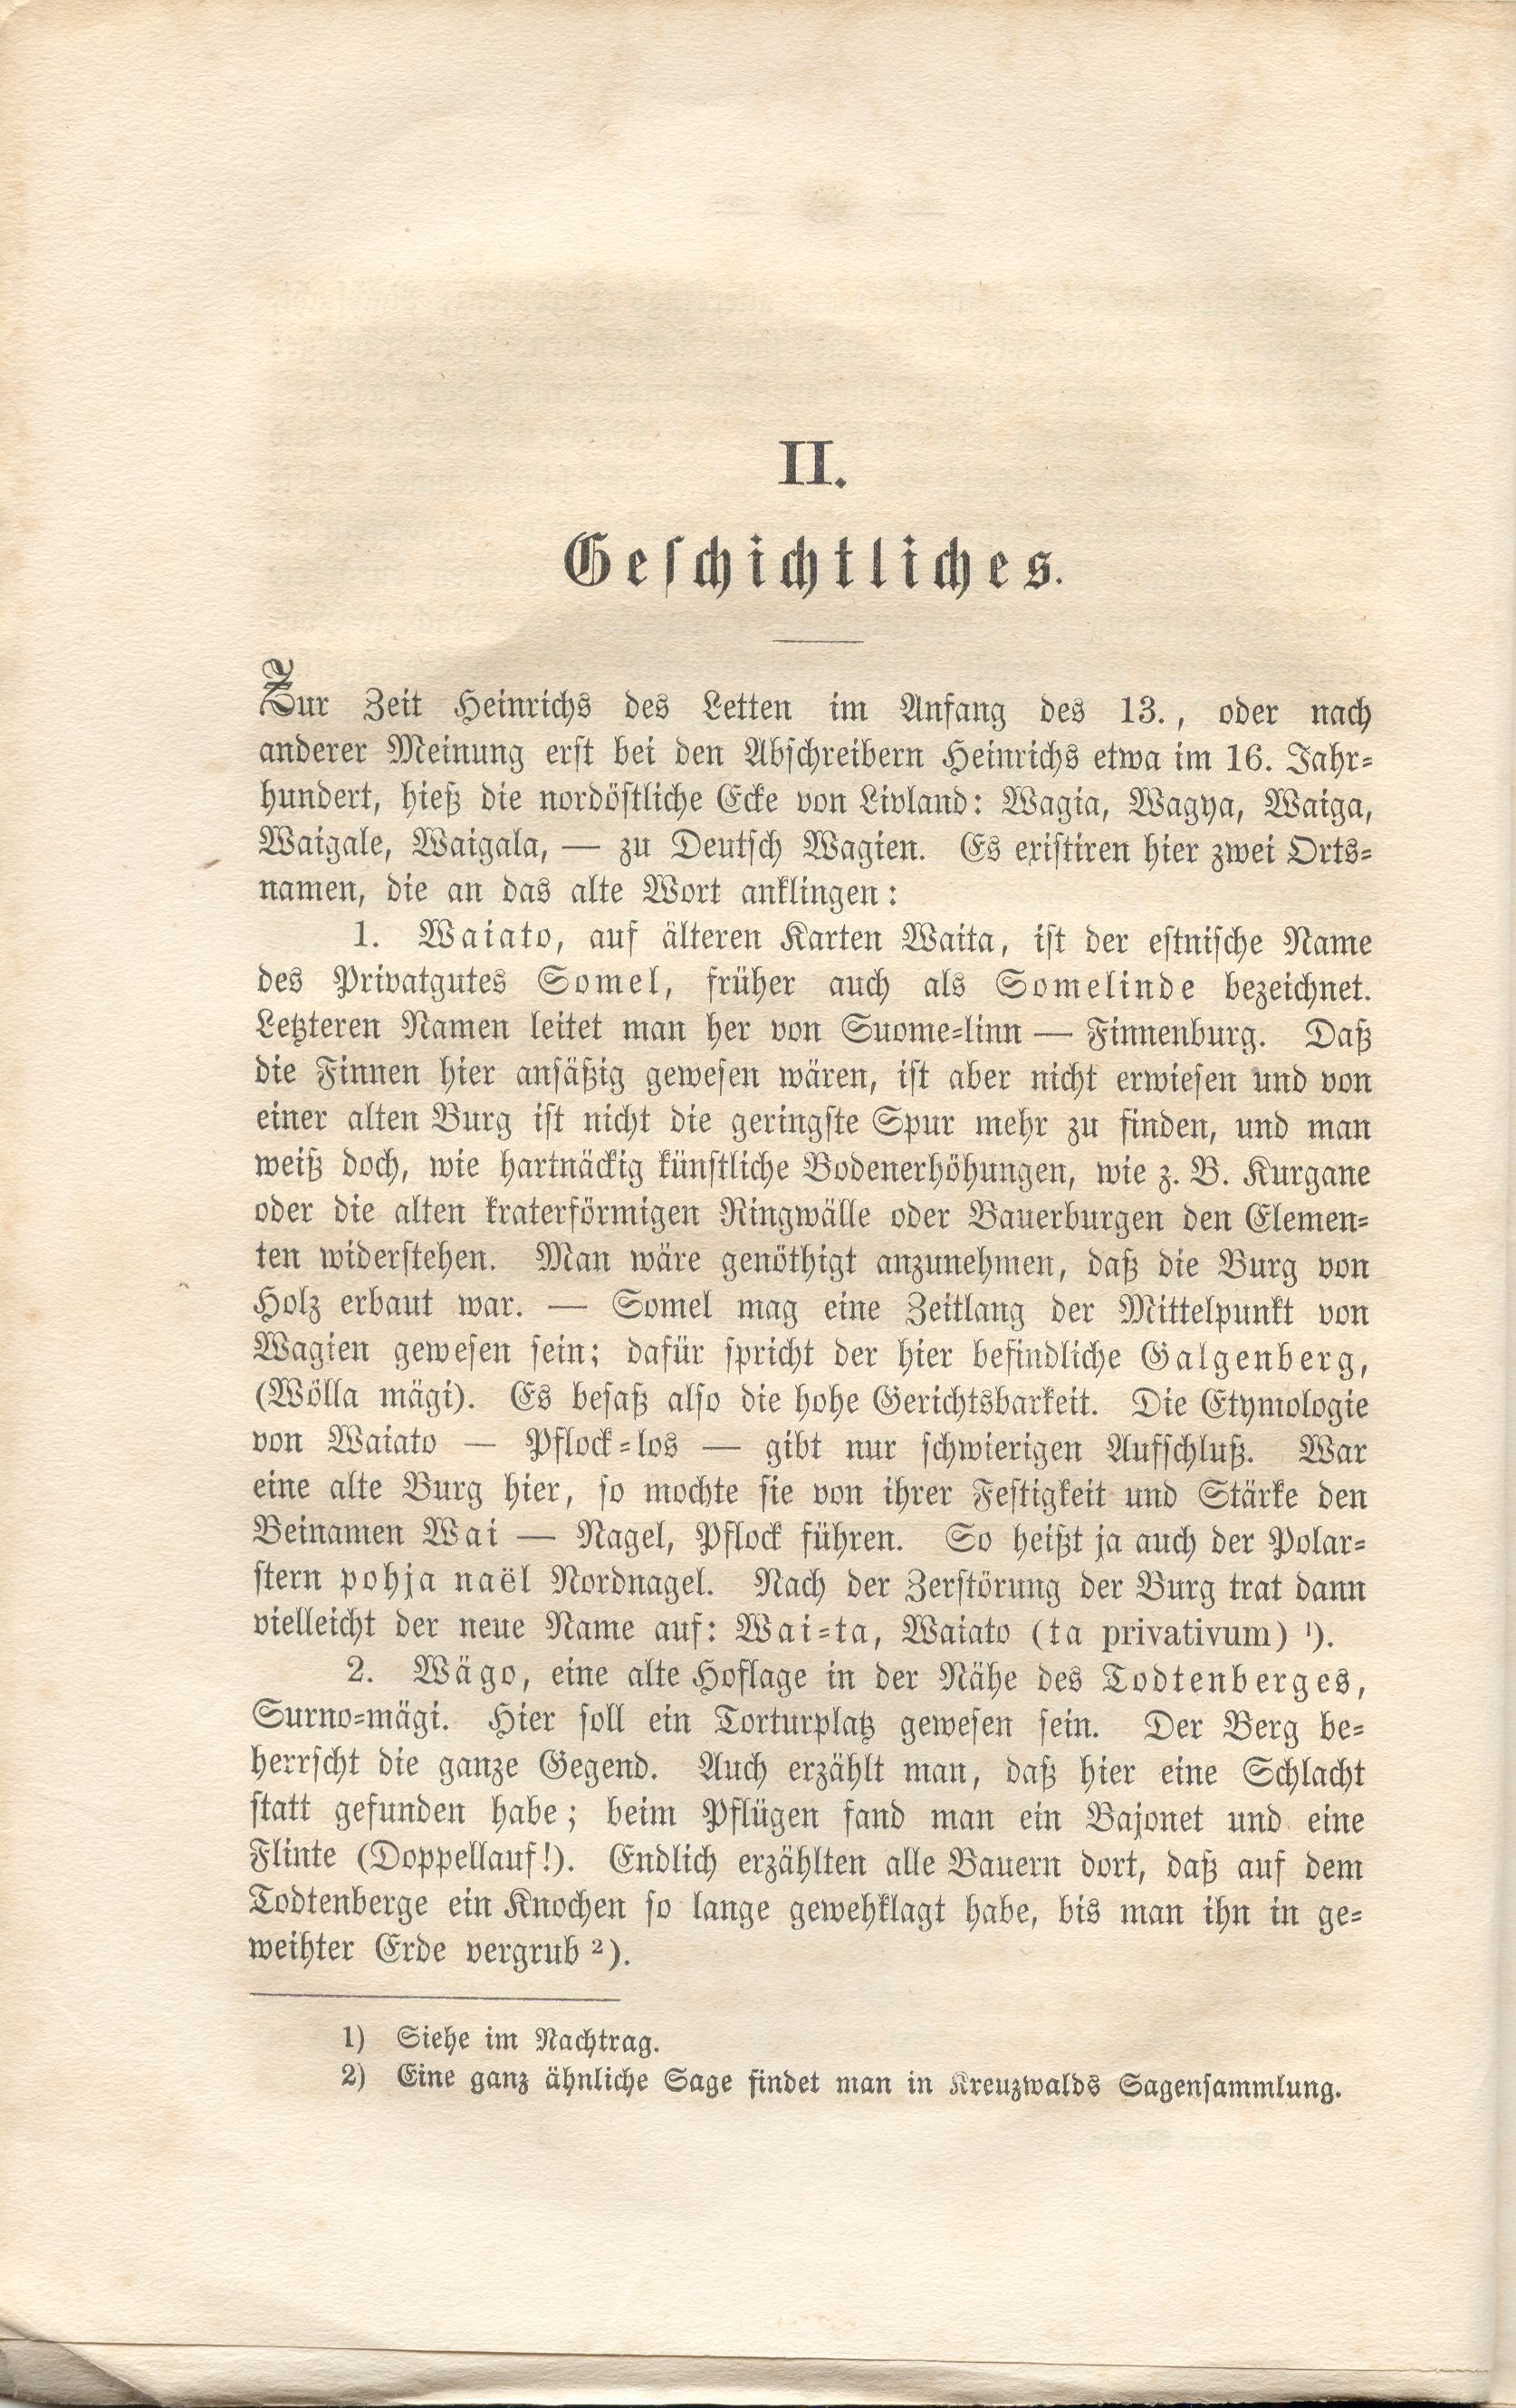 Wagien (1868) | 38. (34) Main body of text